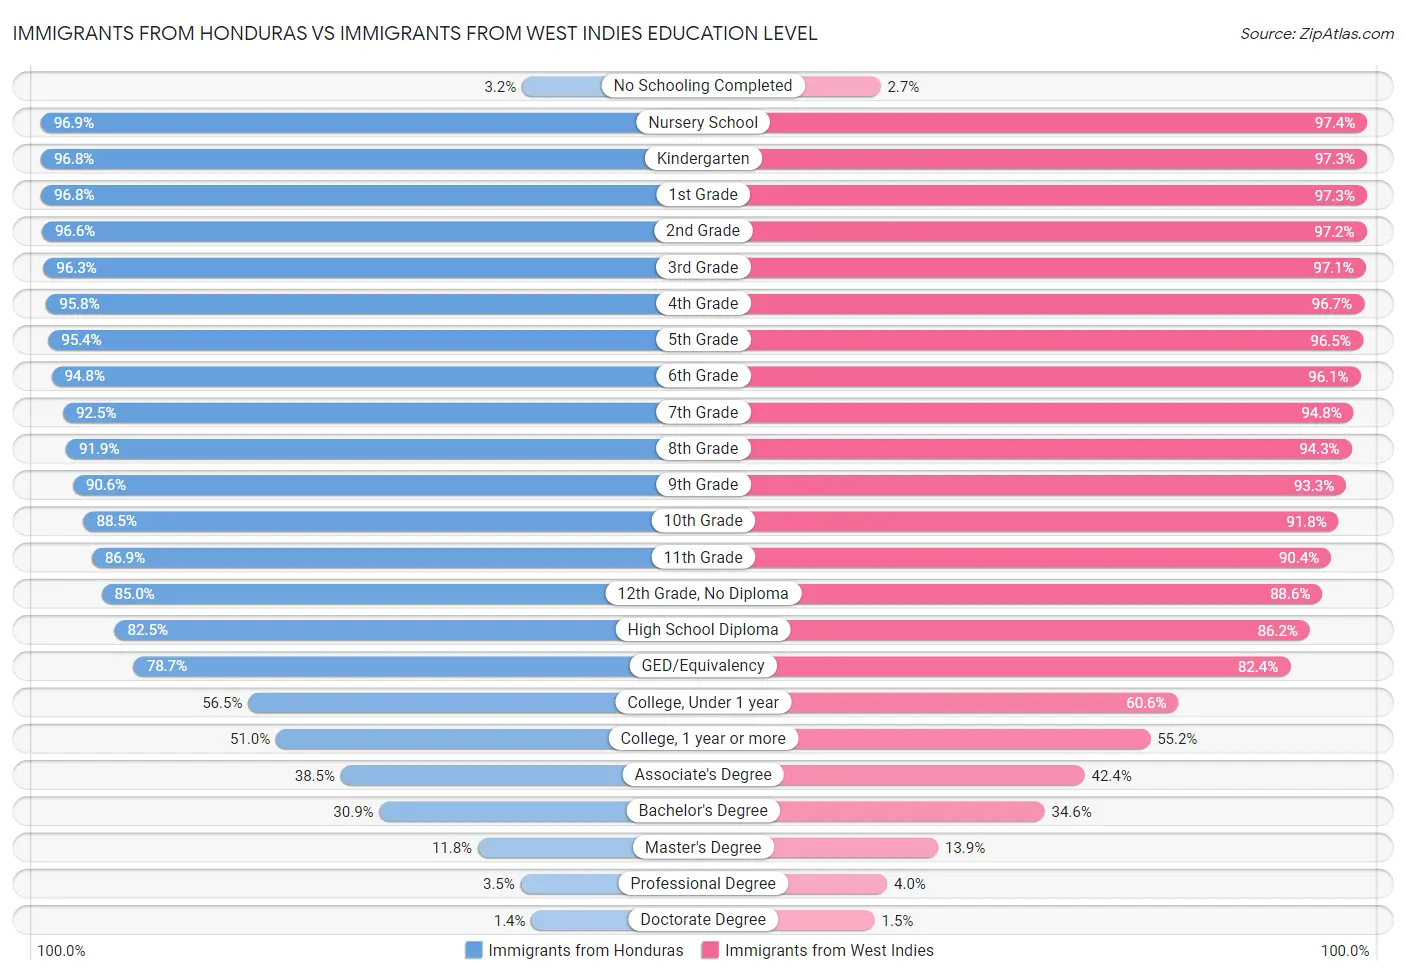 Immigrants from Honduras vs Immigrants from West Indies Education Level